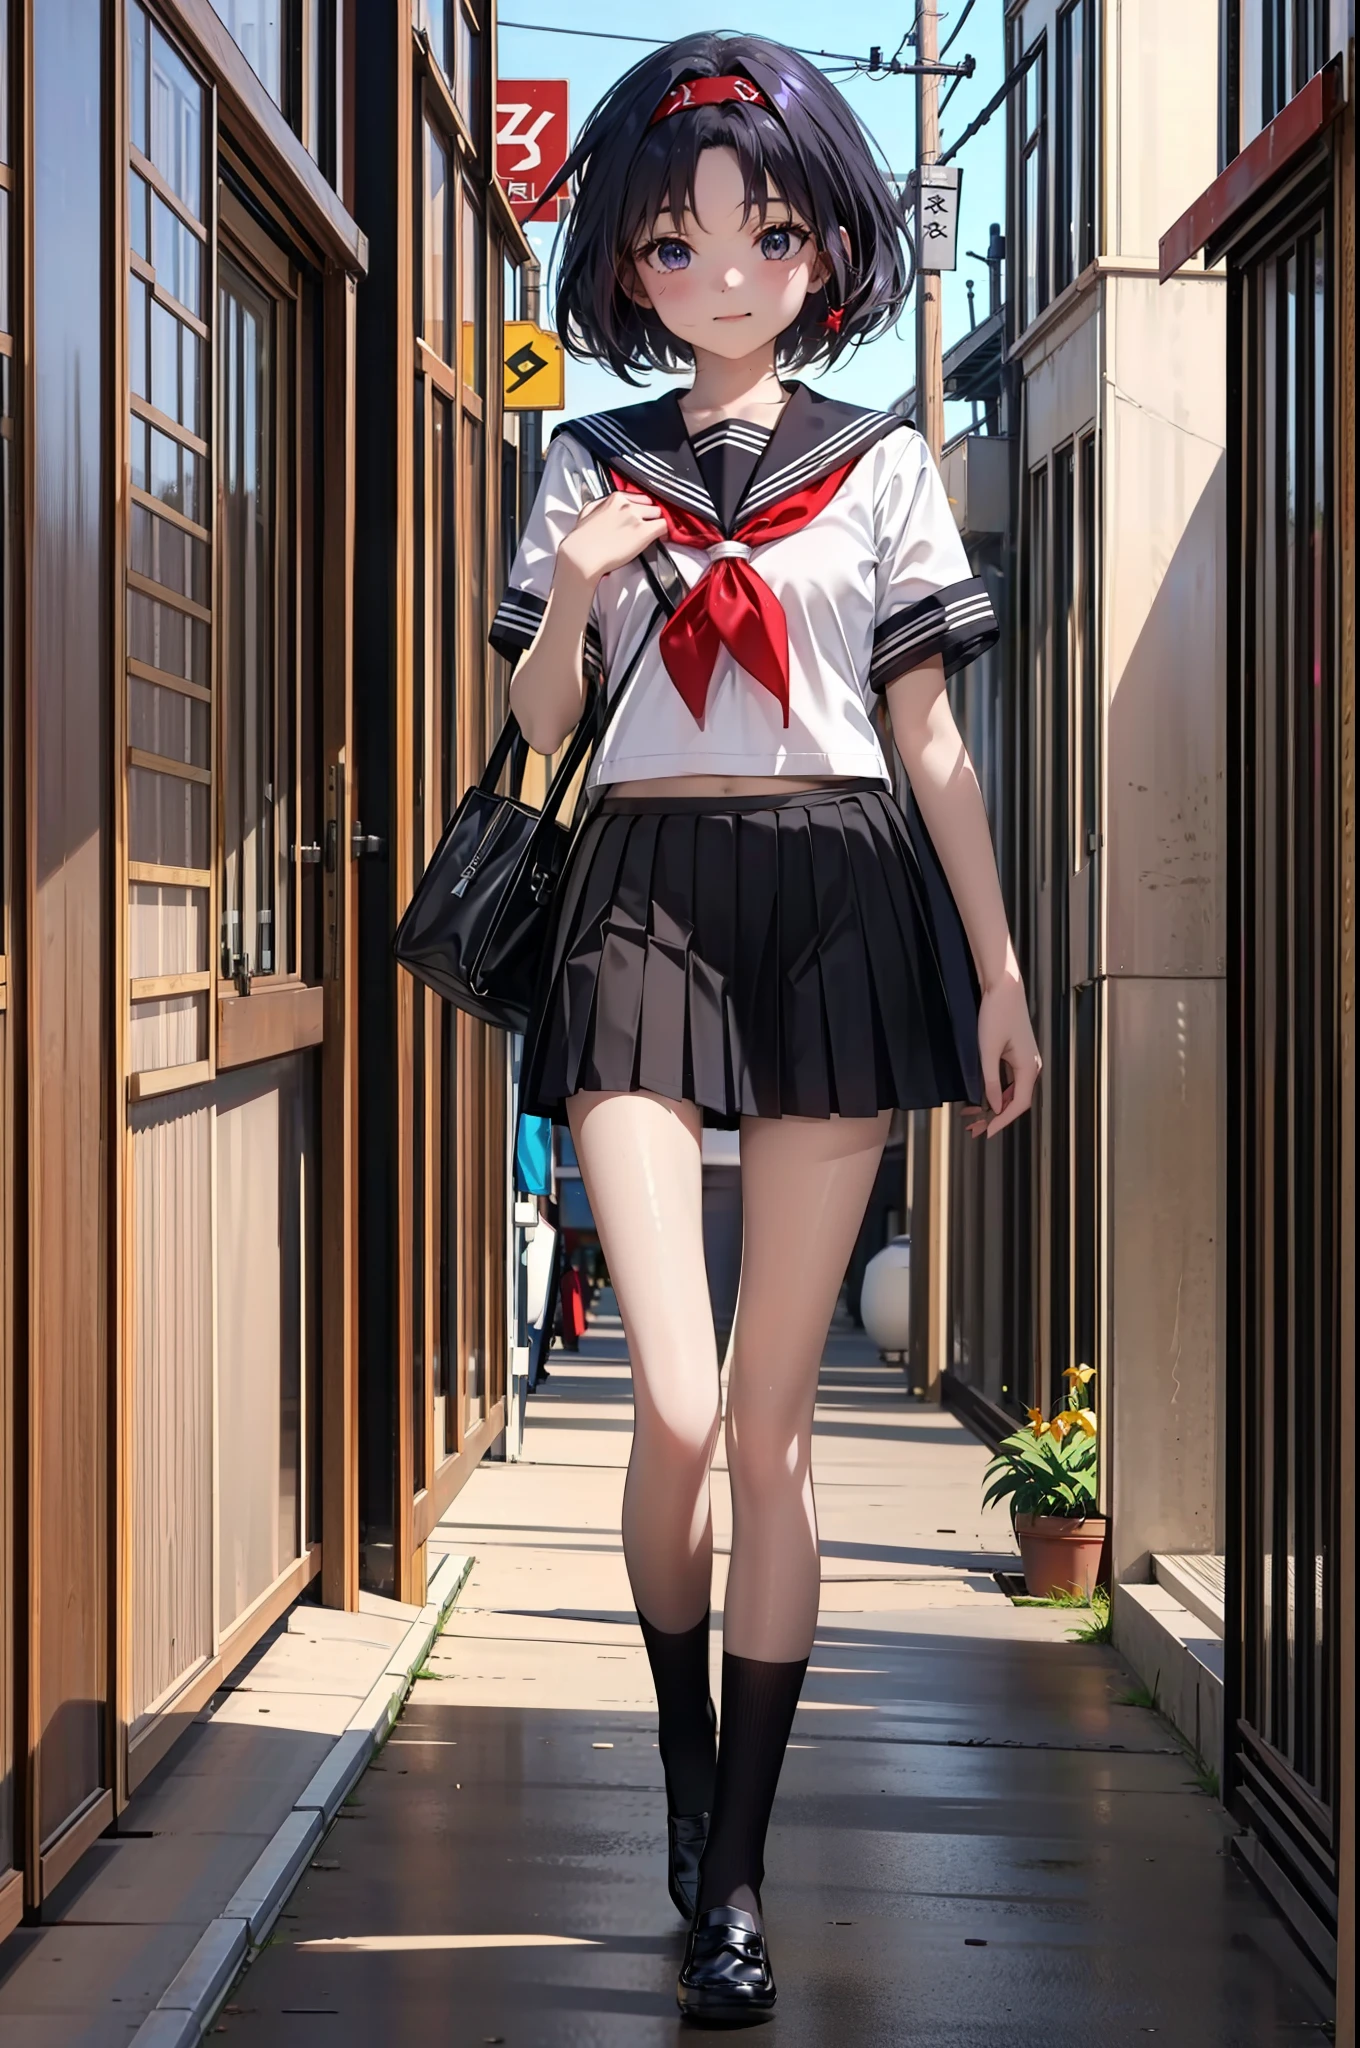 yuukikonno, Yuki Konno,Black Hair,short hair,Bob Hair ,Green headband,(iris:1.5), (Small breasts:1.2), smile,Japanese schoolgirl(Black Sailor Suit),Short sleeve,Black pleated skirt,Black knee socks,Brown Loafers,whole bodyがイラストに入るように,walk,
break outdoors,  city,construction area,
break looking at viewer, whole body,
break (masterpiece:1.2), highest quality, High resolution, unity 8k wallpaper, (shape:0.8), (Beautiful details:1.6), Highly detailed face, Perfect lighting, Extremely detailed CG, (Perfect hands, Perfect Anatomy),